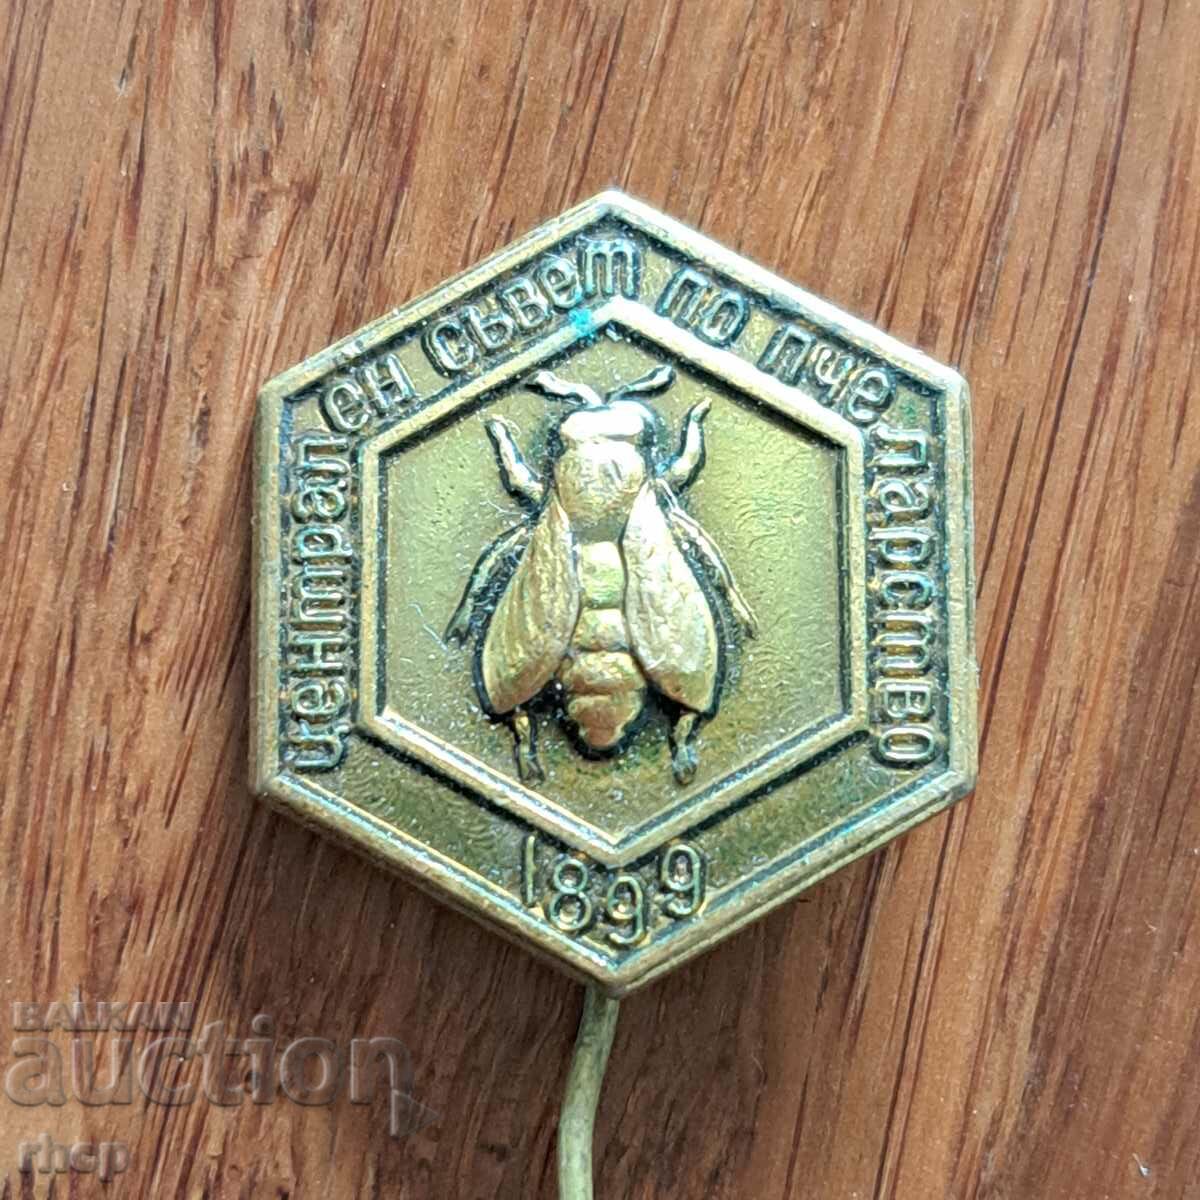 Beekeeping Central Council 1899 old badge